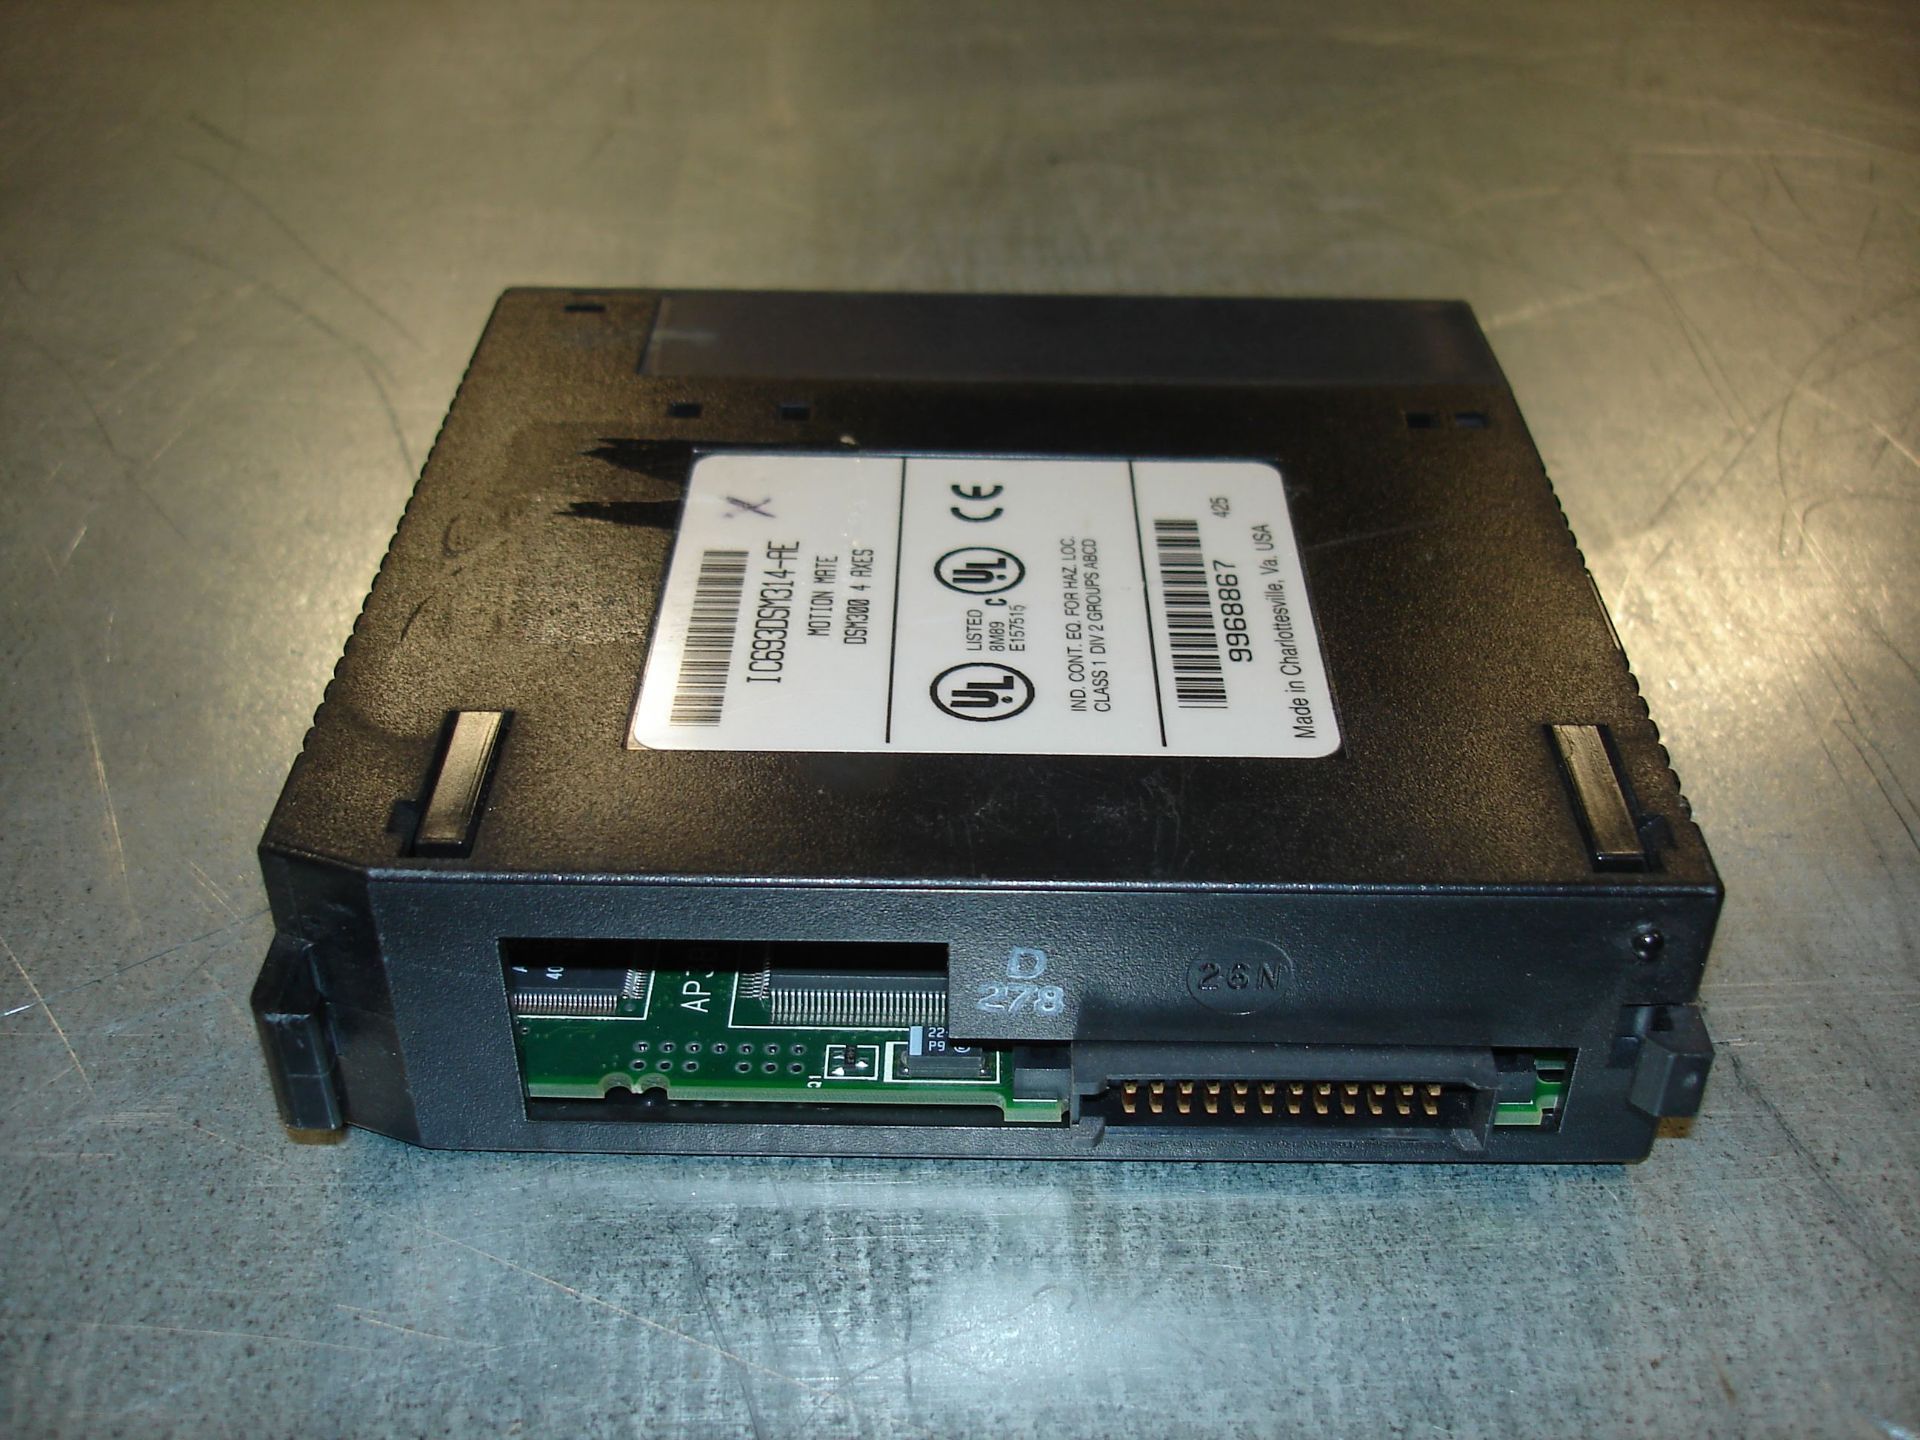 (1) IC693DSM314-AE GE FANUC MOTION MATE 4 AXES CONTROL MODULE USED. Pickup your lot(s) for free! - Image 3 of 4